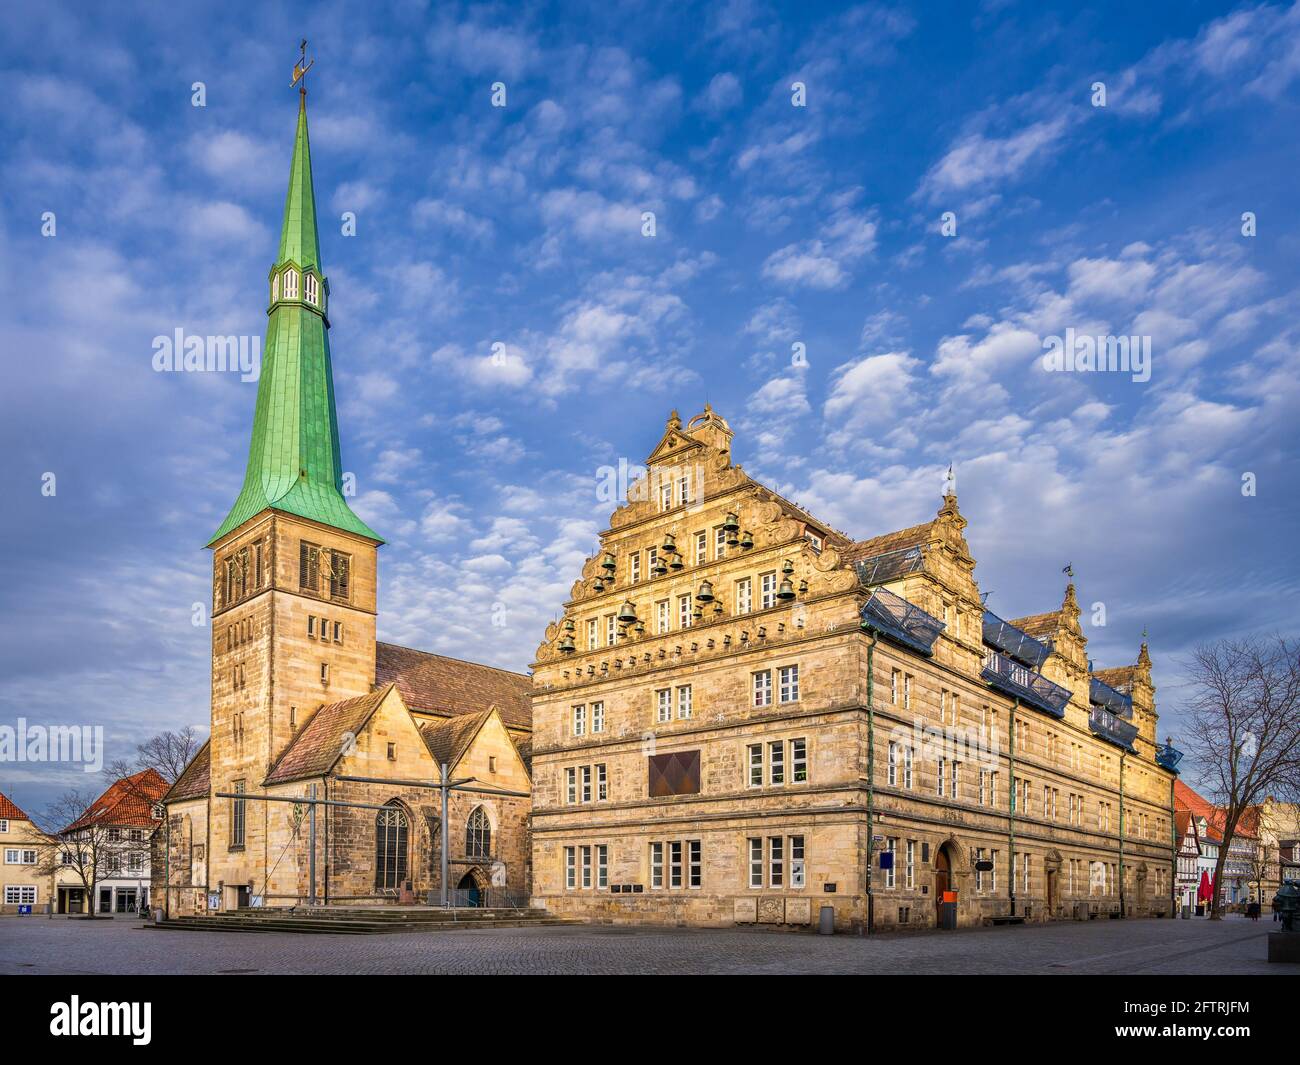 Old town of Hamelin, Germany with the famous Hochzeitshaus building Stock Photo